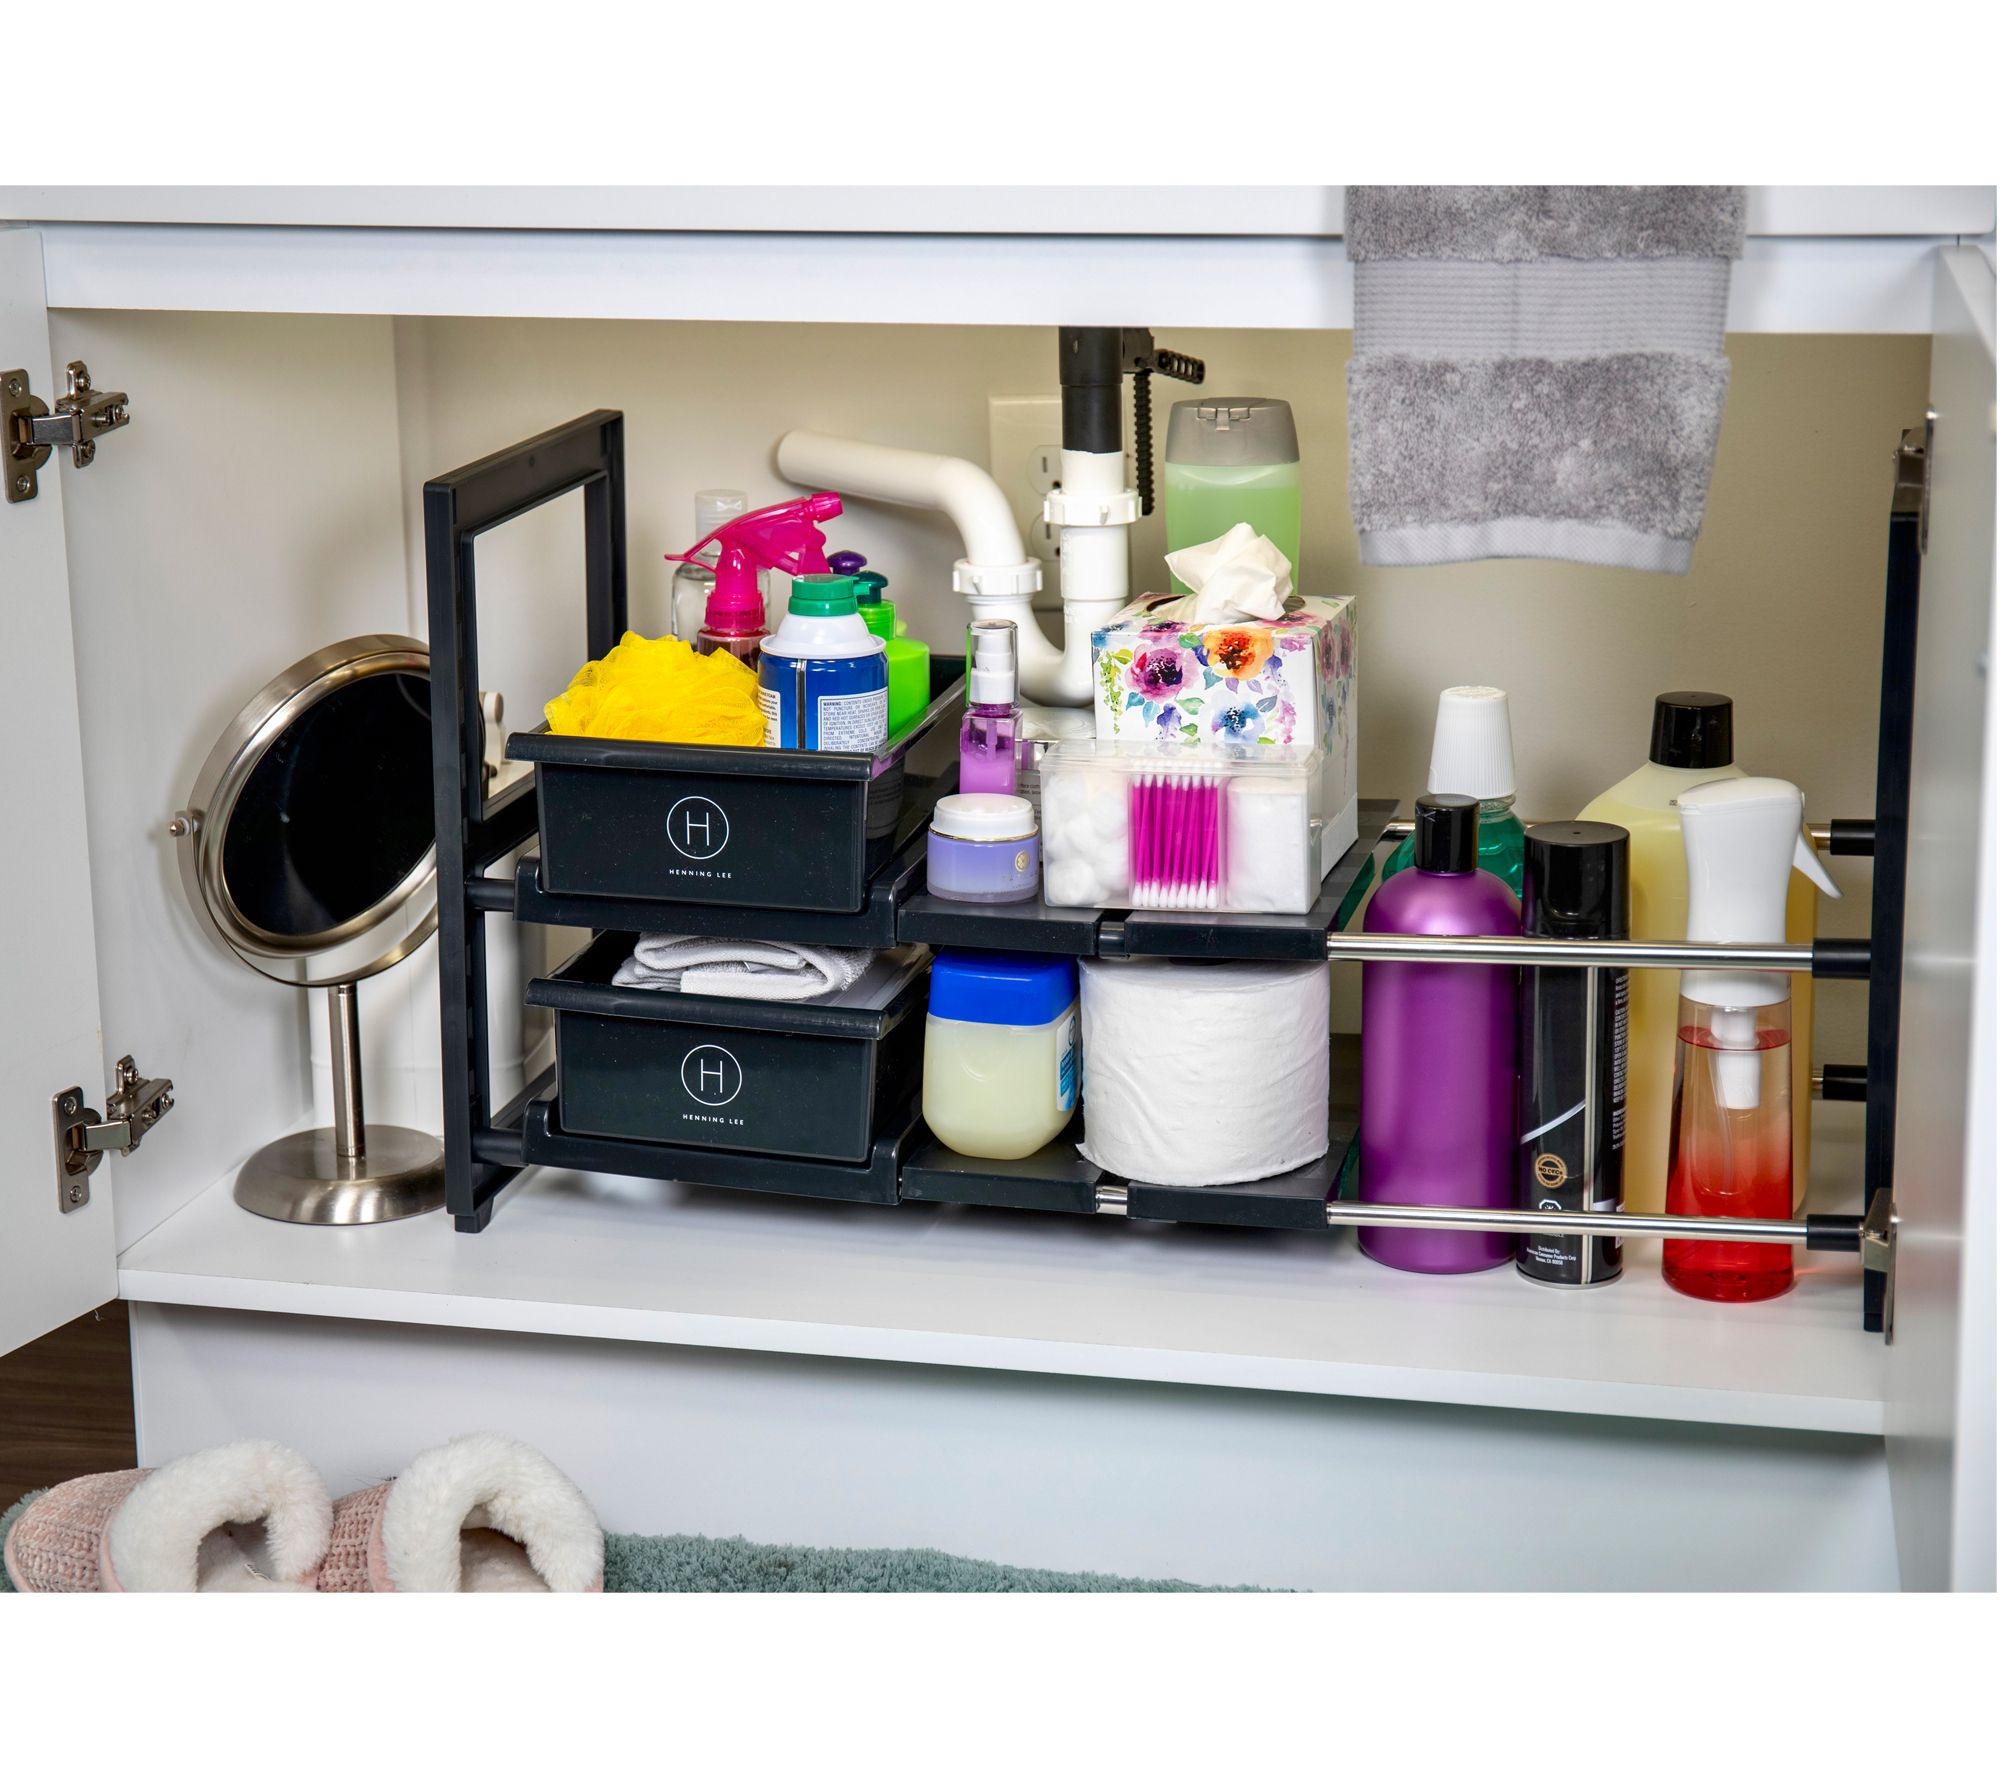 Expandable Adjustable Under Sink Shelf For Kitchen And Home